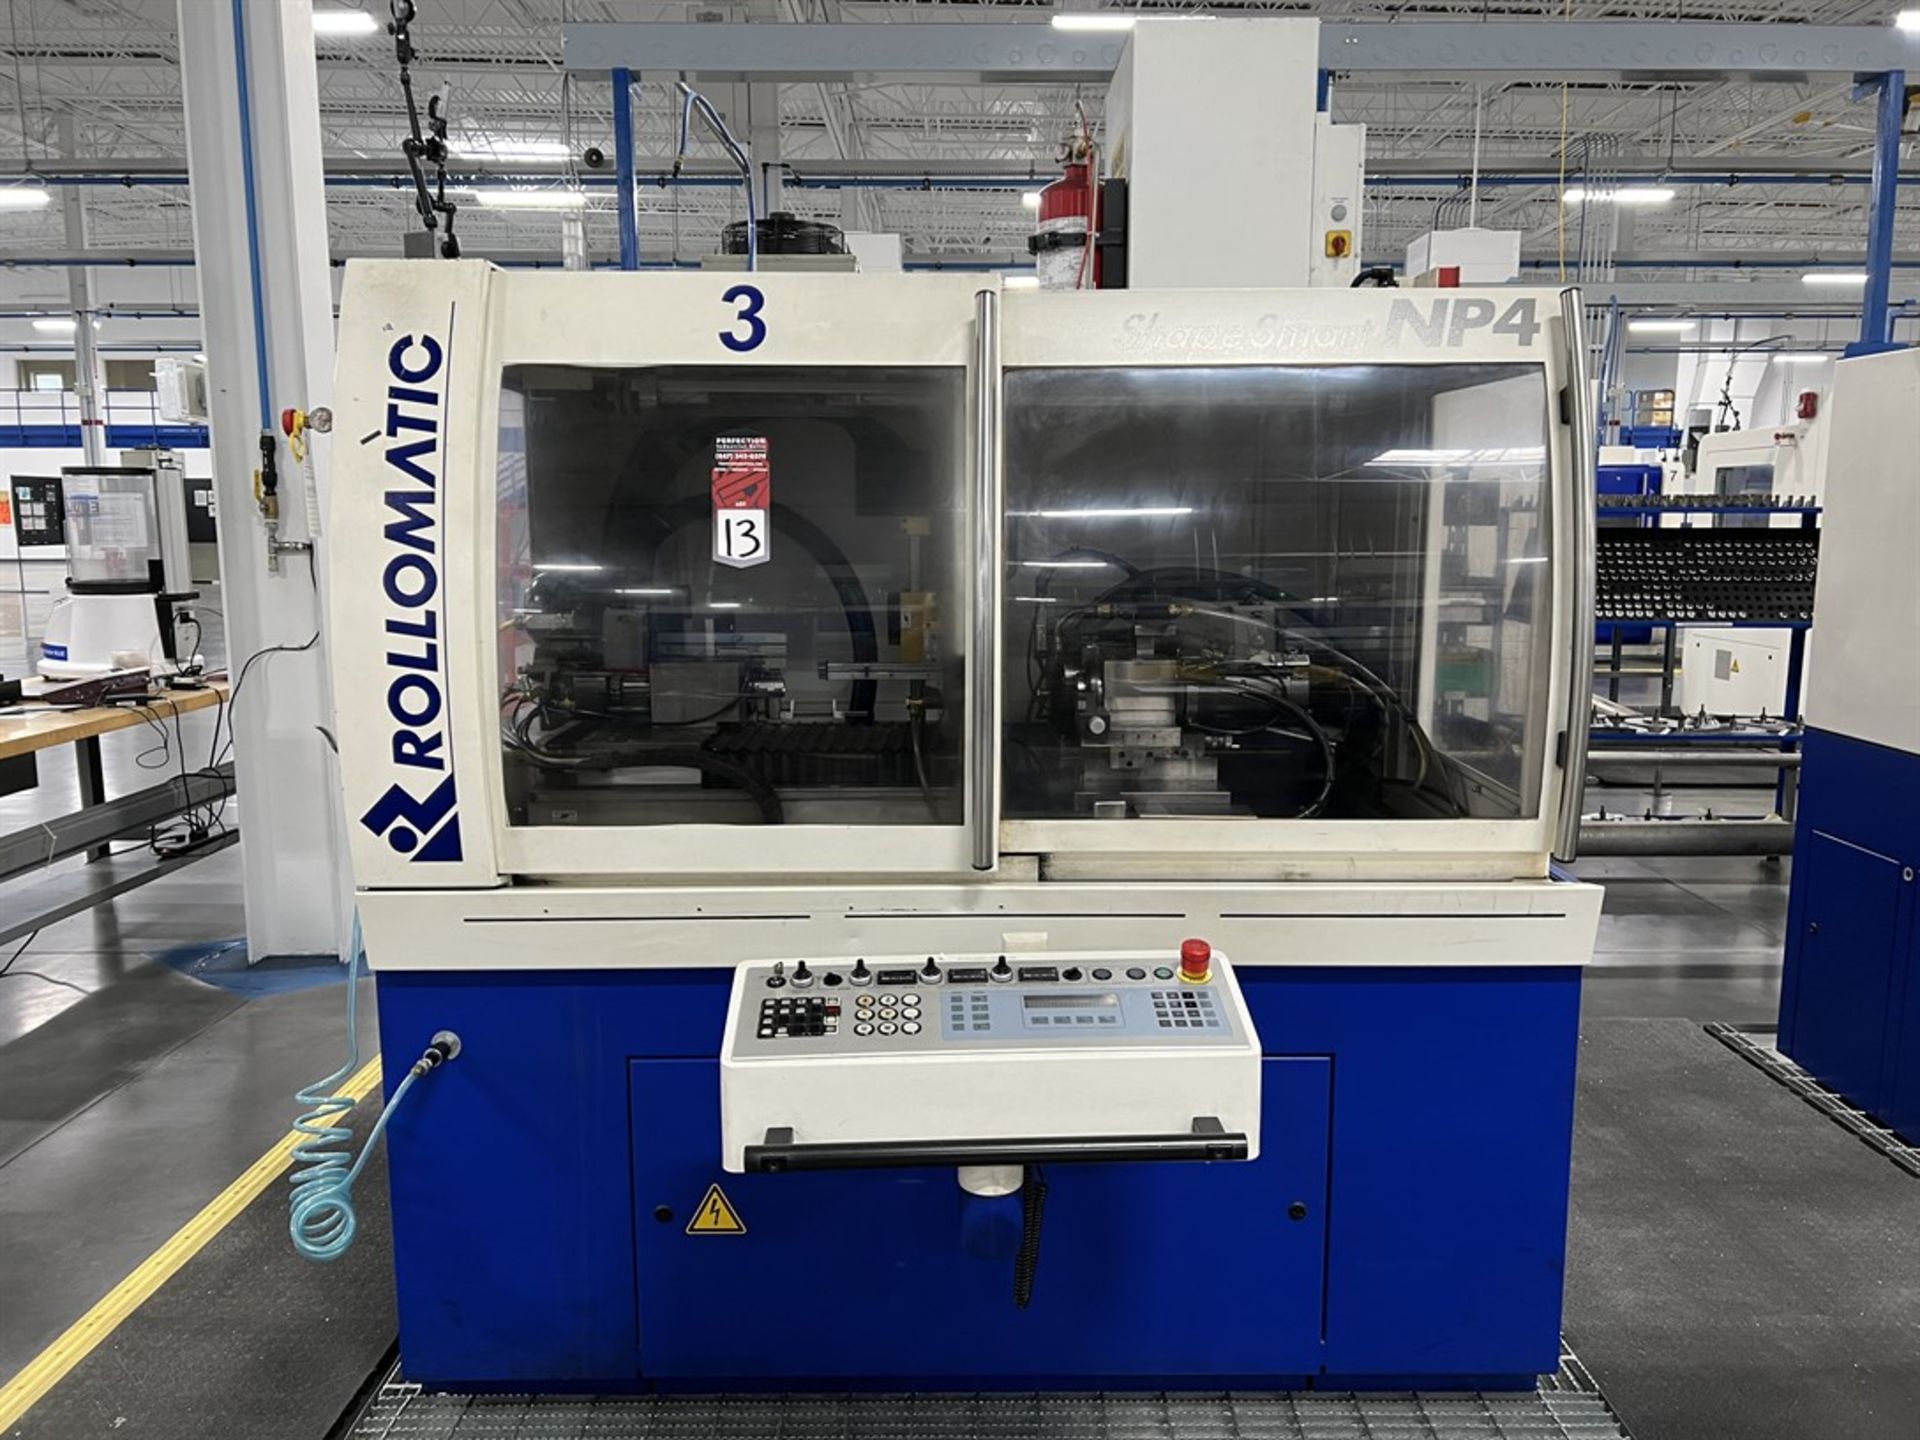 2006 ROLLOMATIC CNC NP4 CNC Tool & Cutter Grinder, s/n 5594, (Needs Chip Installed, Machine Comes w/